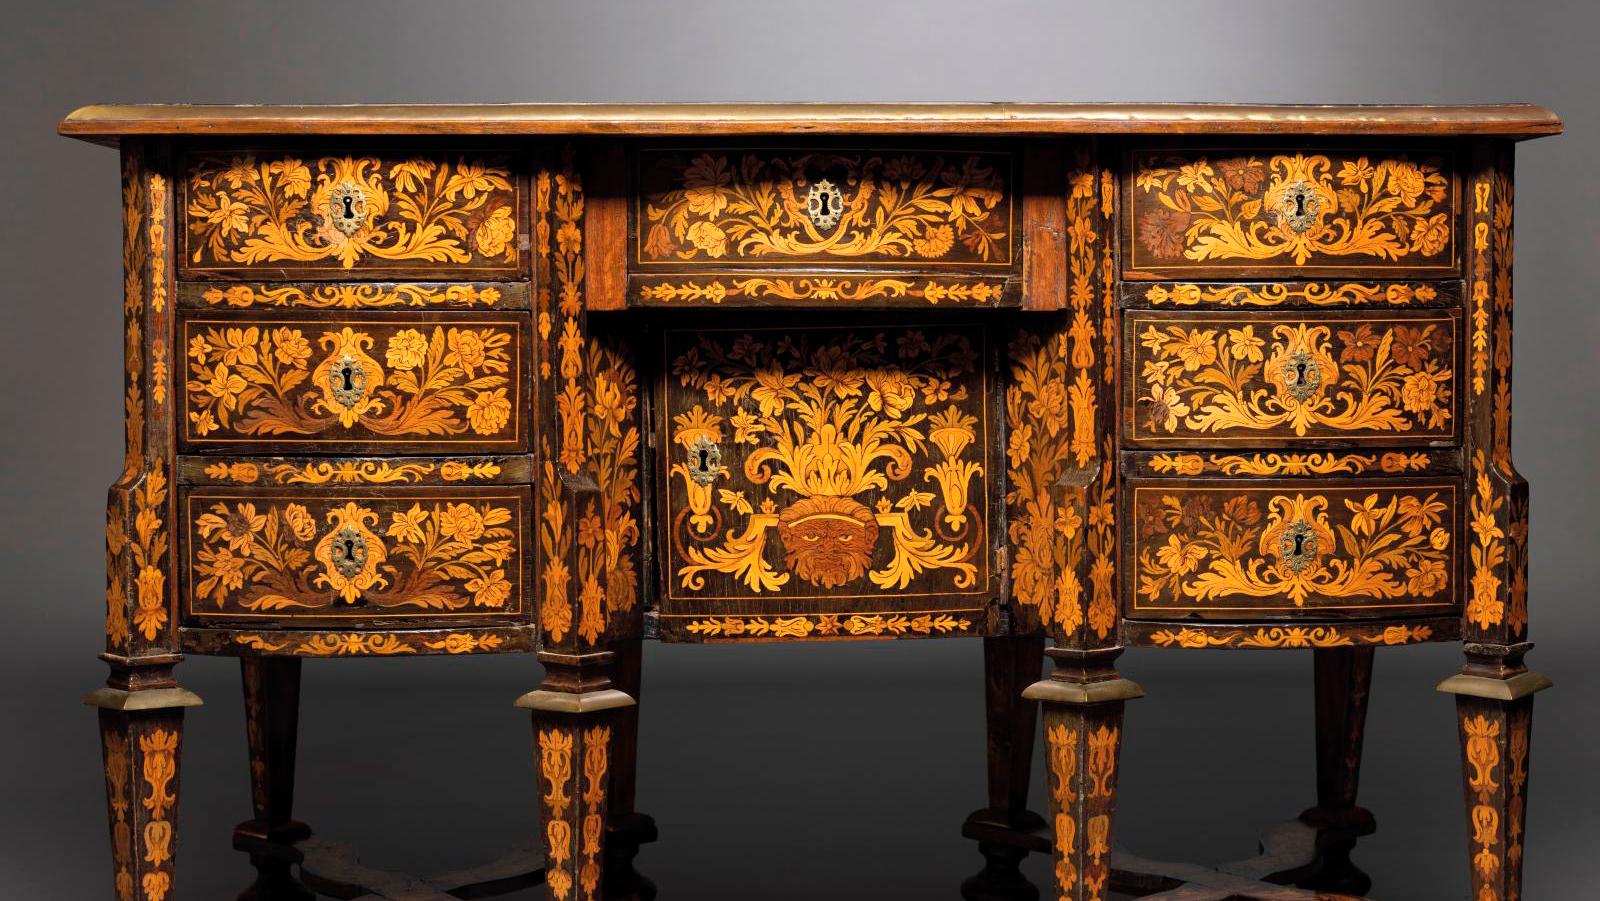 Louis XIV period, c. 1685-1690, attributed to Renaud Gaudron (c. 1653-1727). Mazarin-style... Marquetry’s Glory Days Under Louis XIV